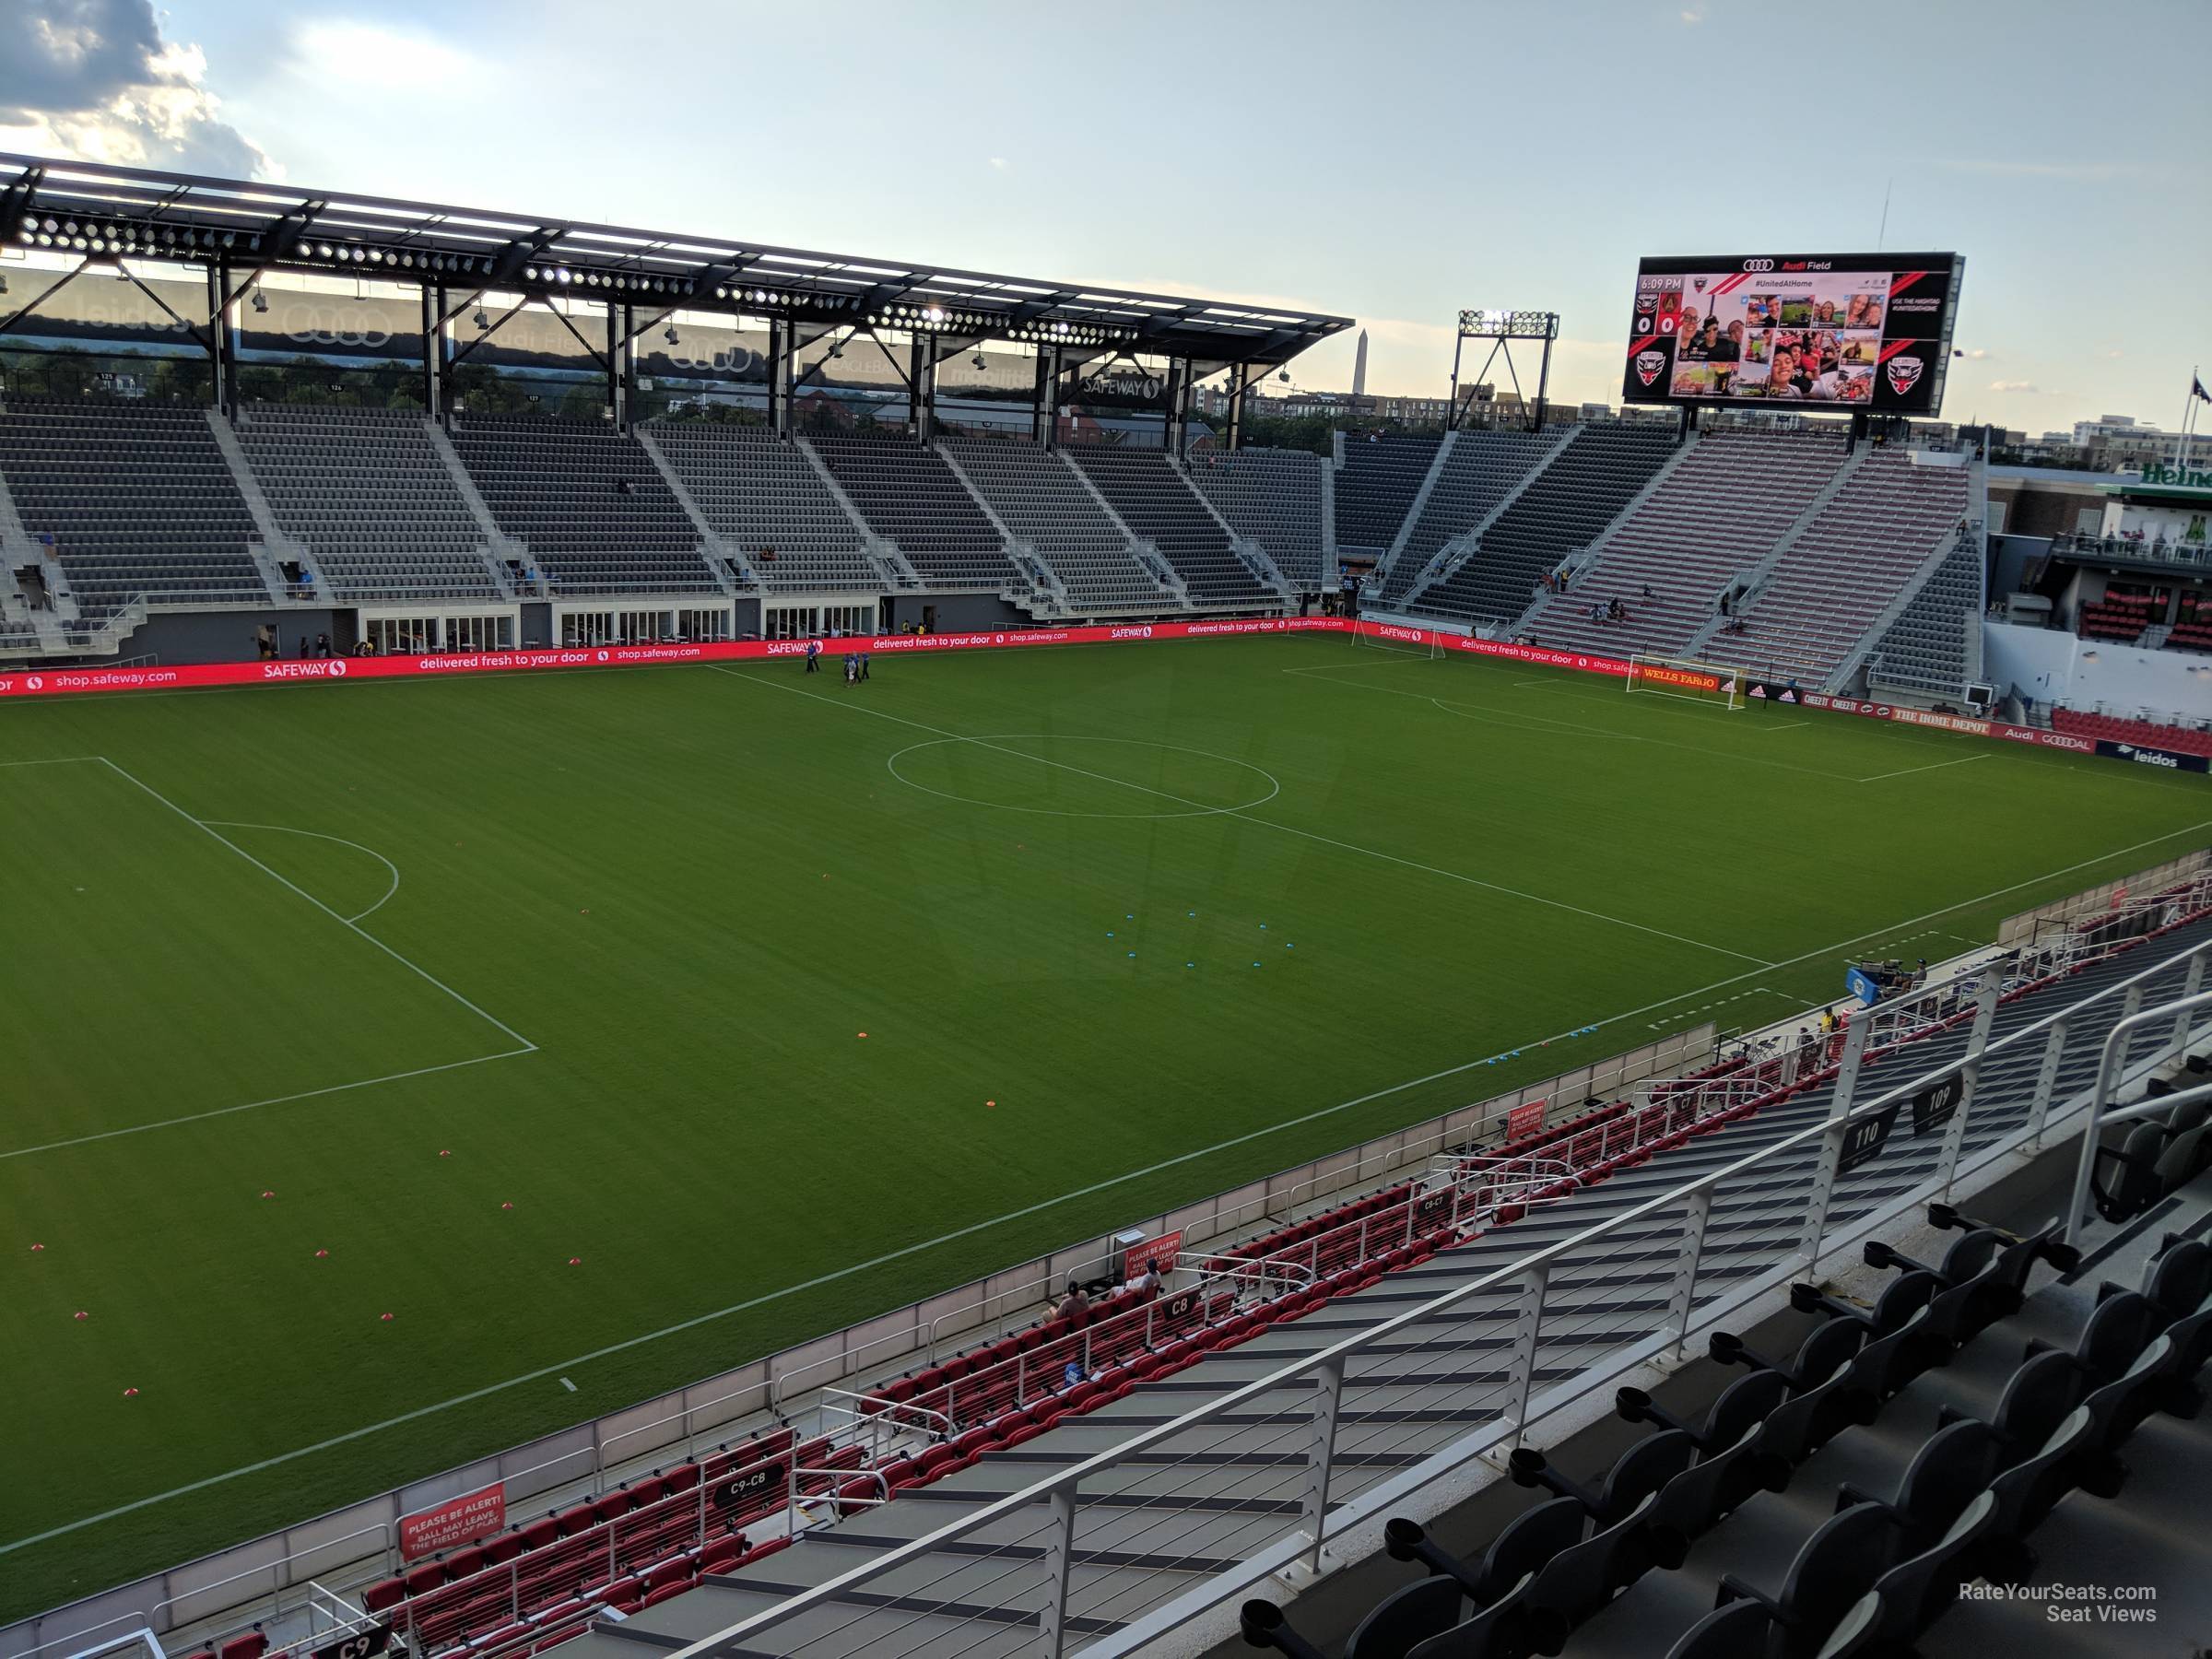 section 110, row 4 seat view  - audi field